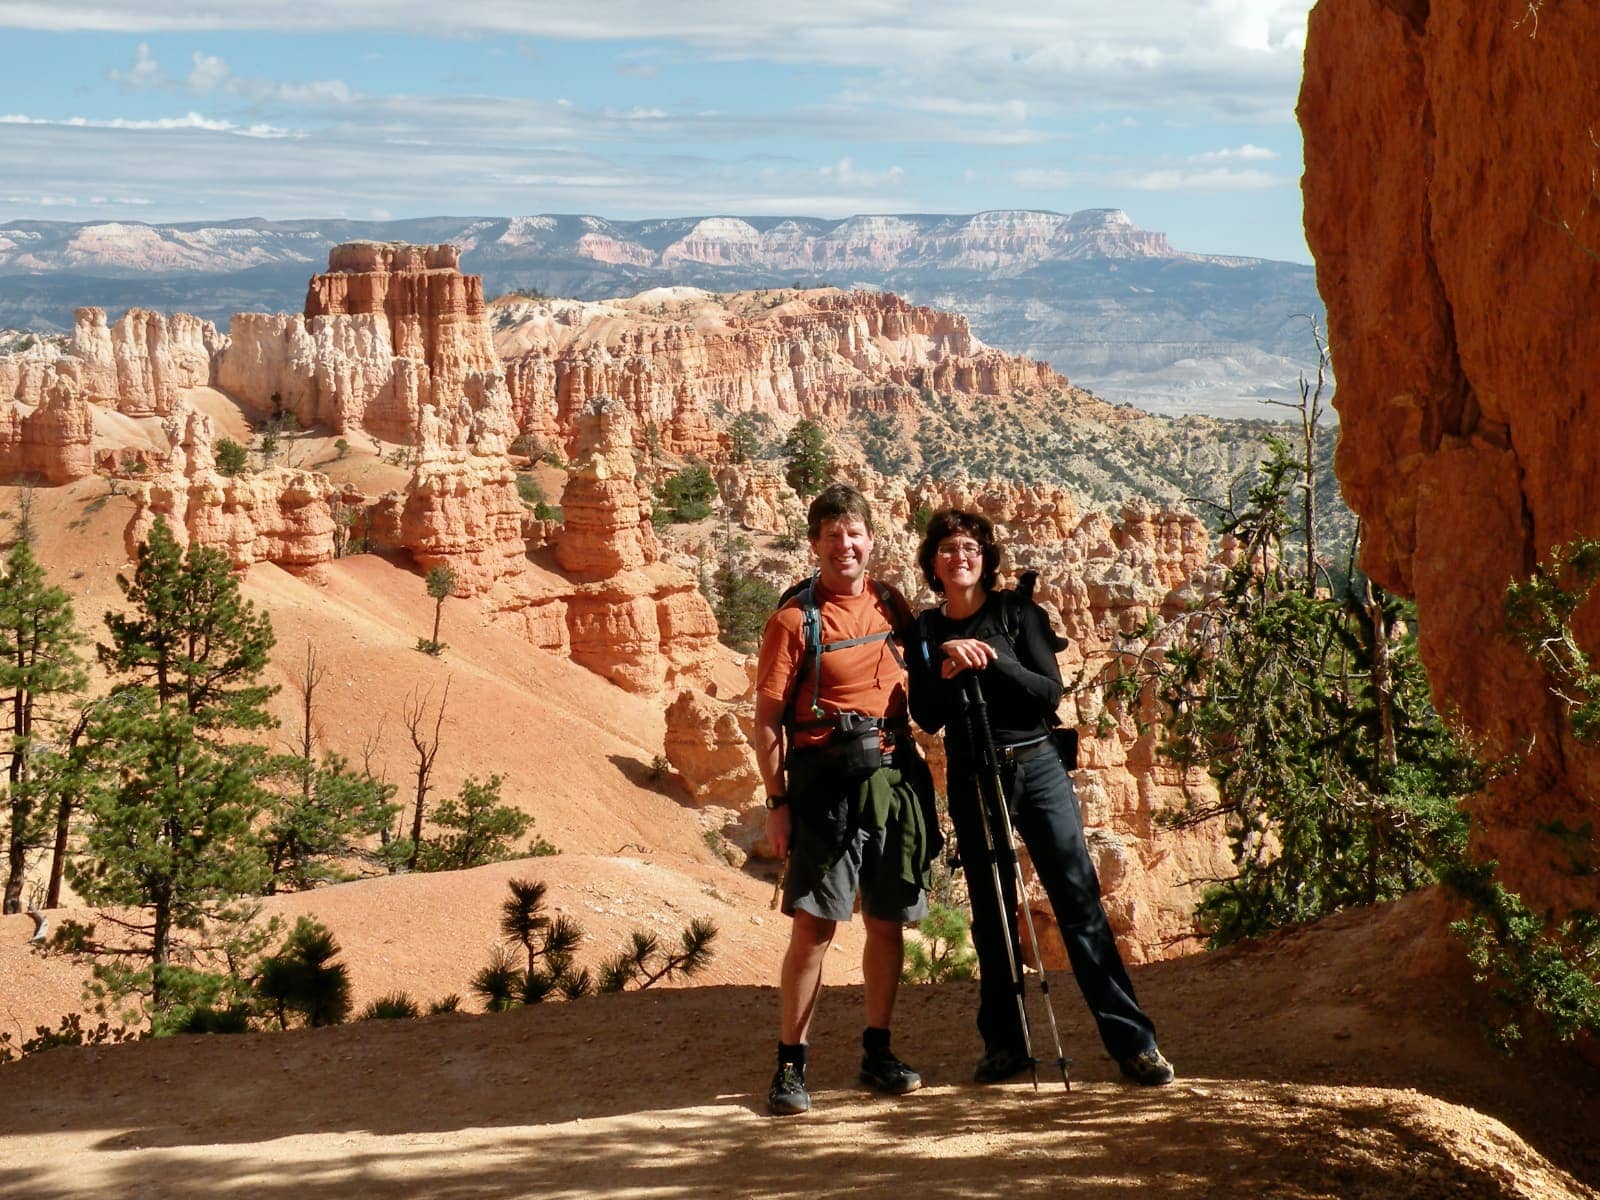 Man and woman posing with unique rock formations in background